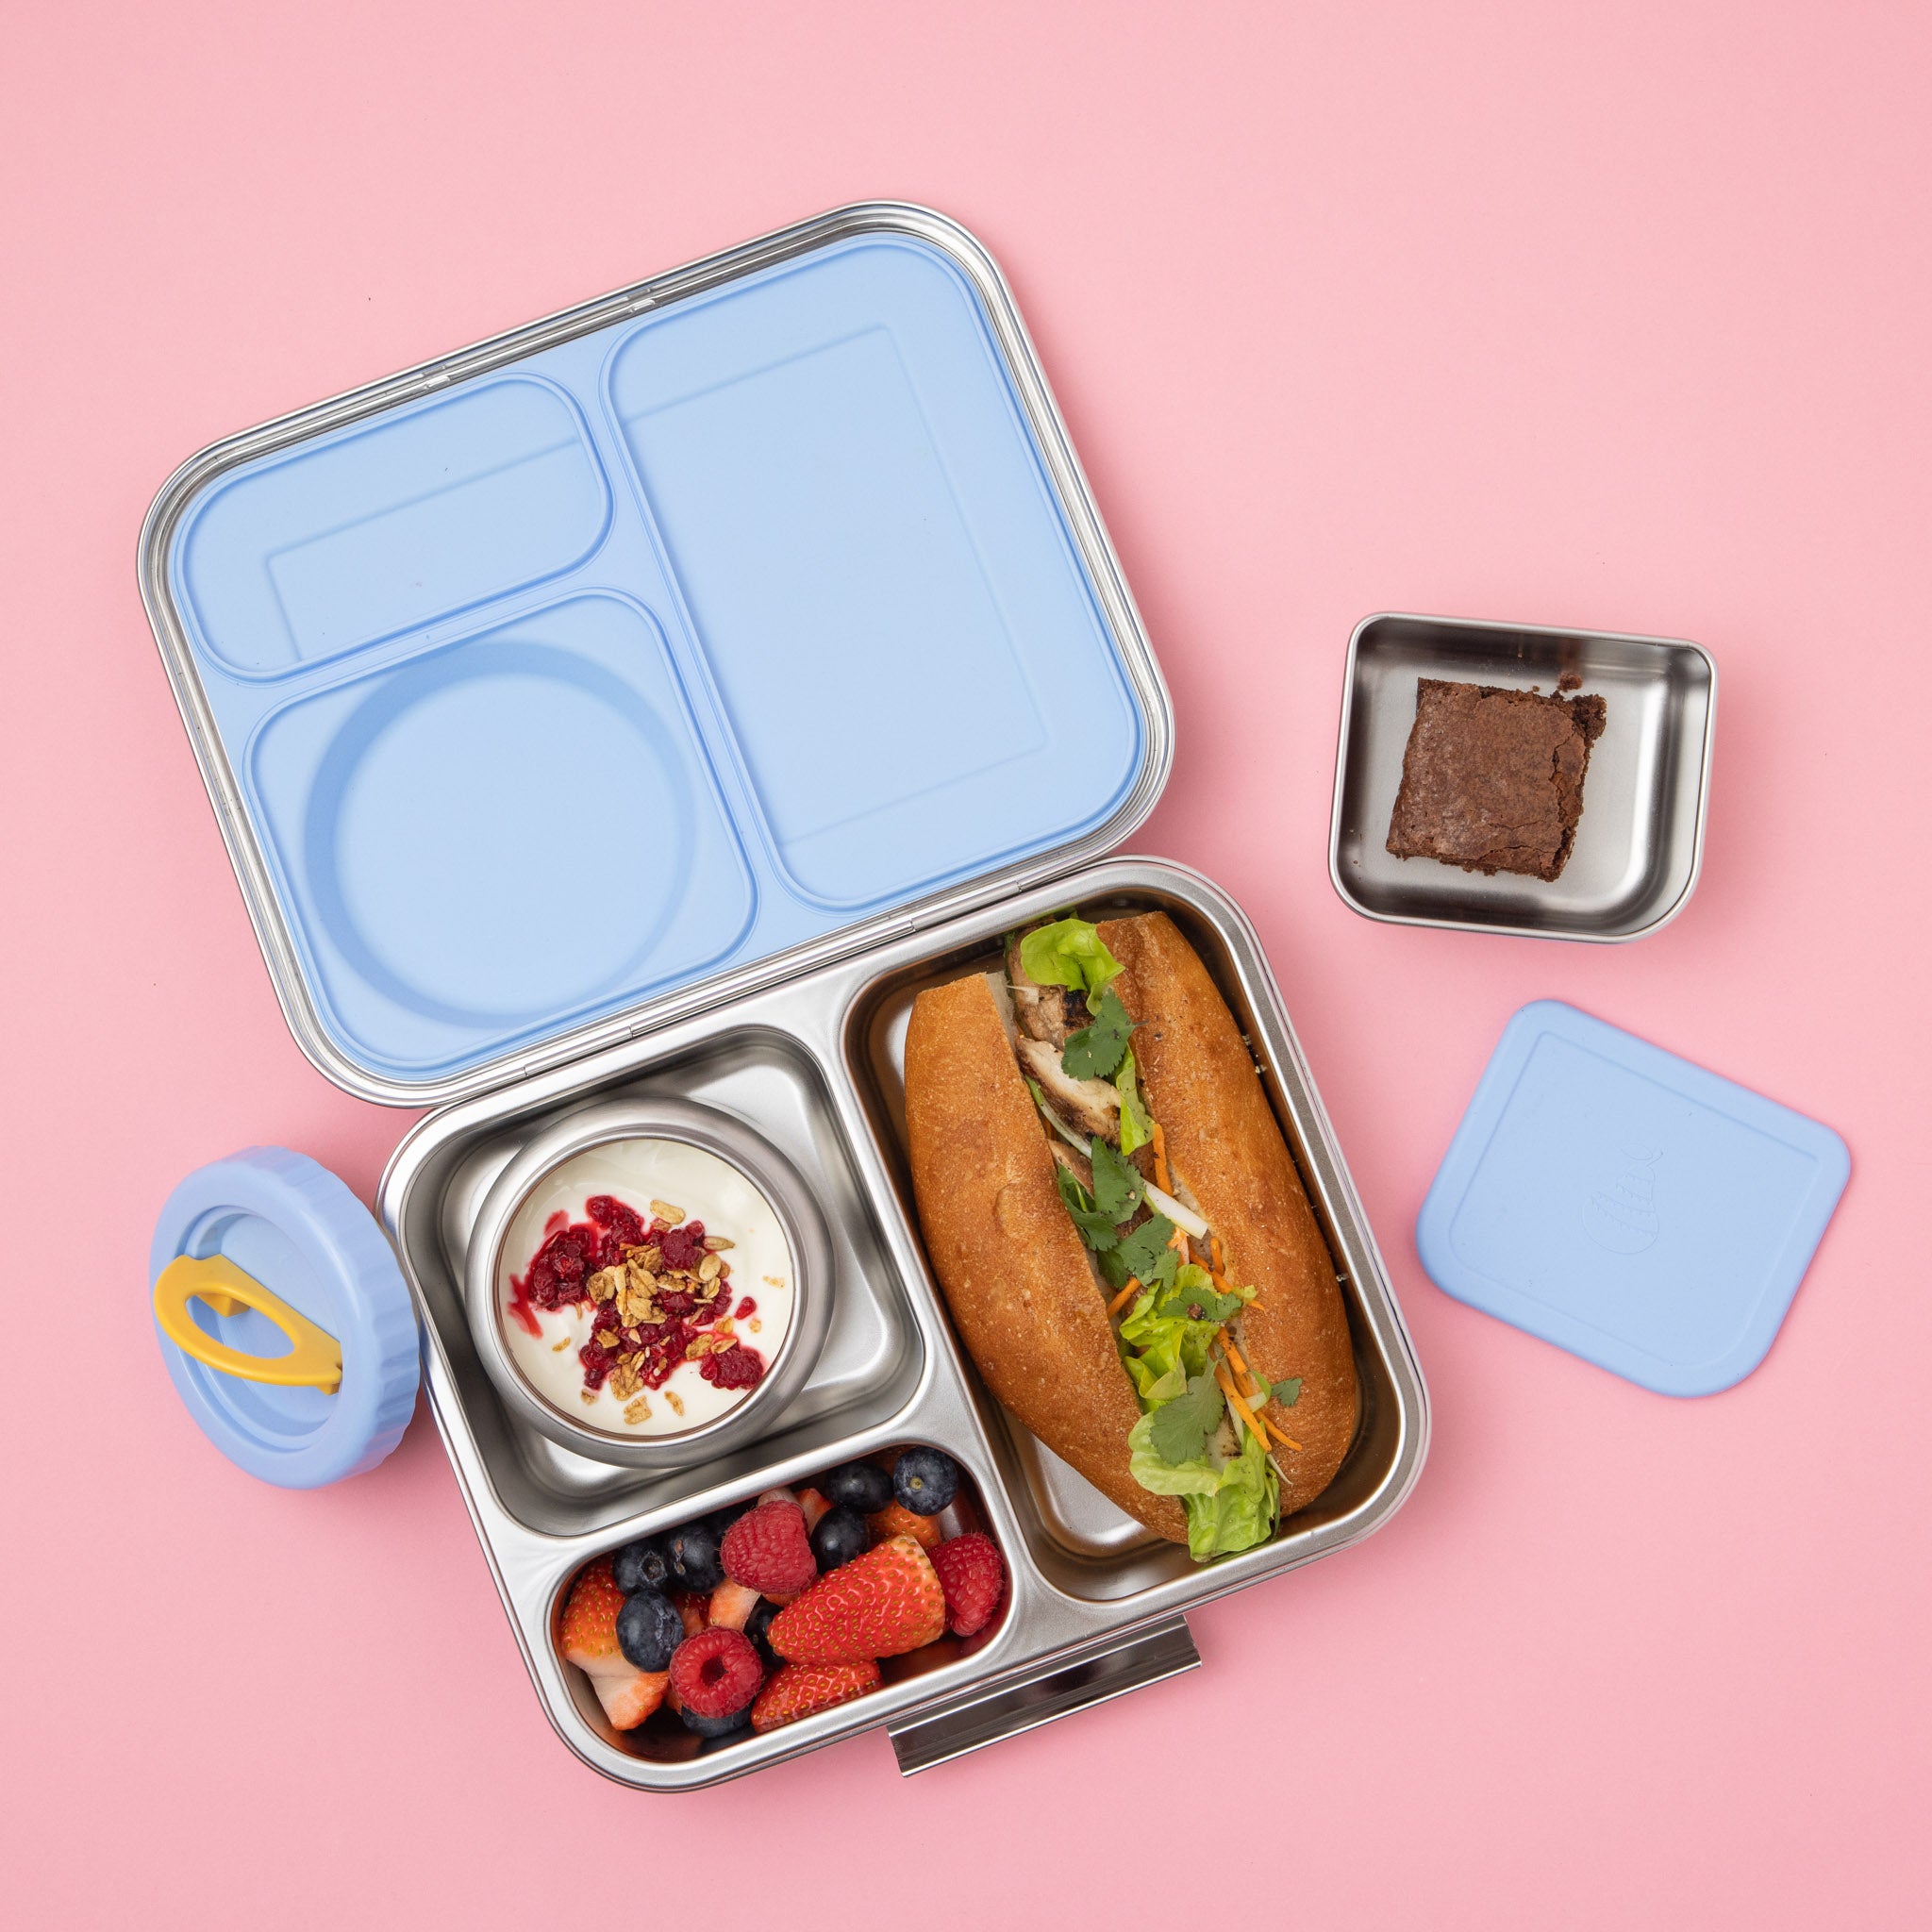 stainless steel 3 compartment bento box with light blue silicone seal and insulated food jar plus snack container filled with food 